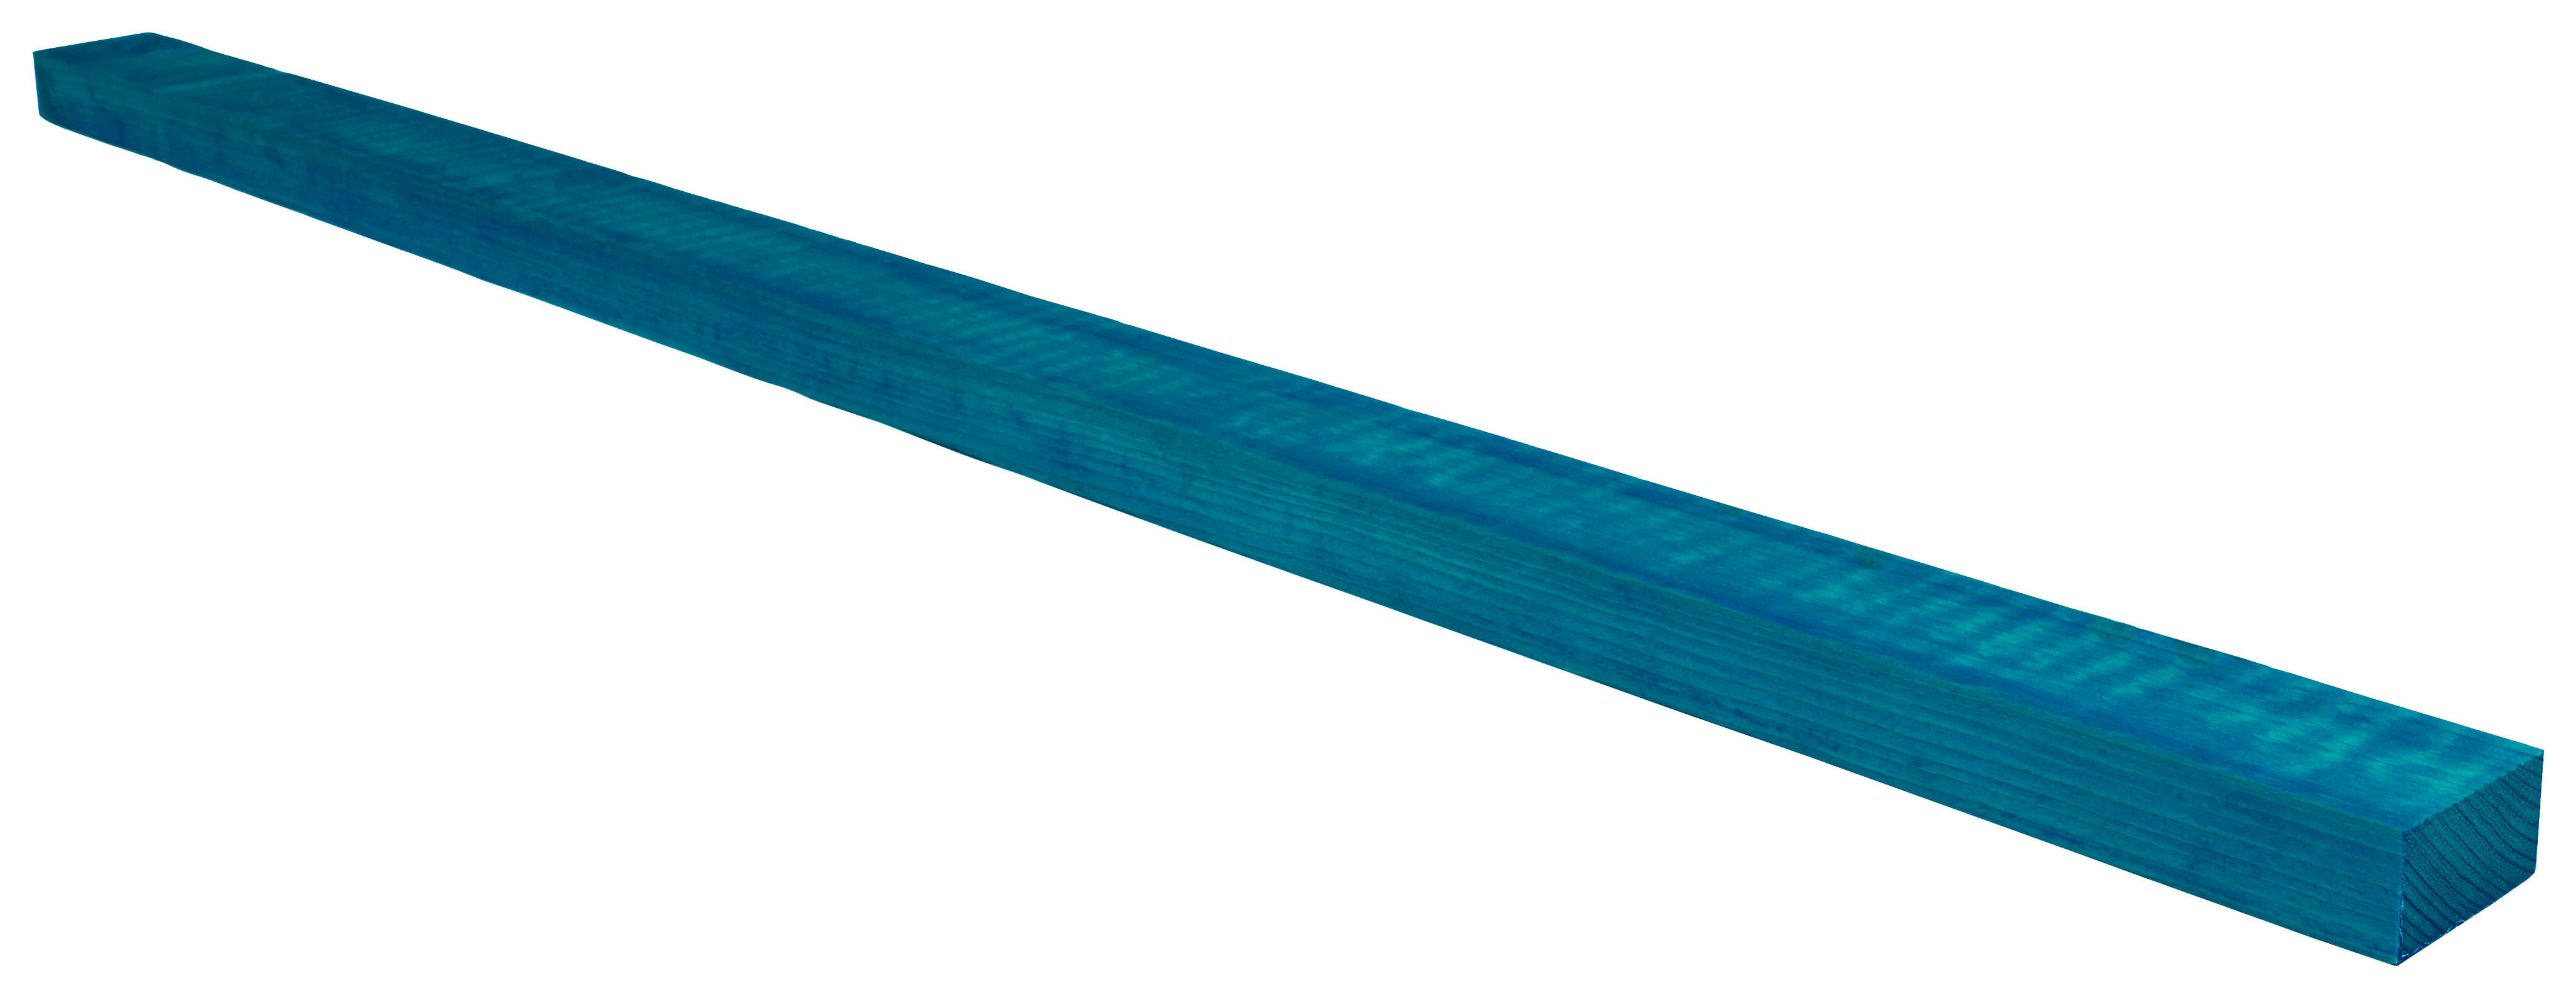 Wickes Treated Timber Roof Batten - 25 x 50 x 3600mm - Pack of 80